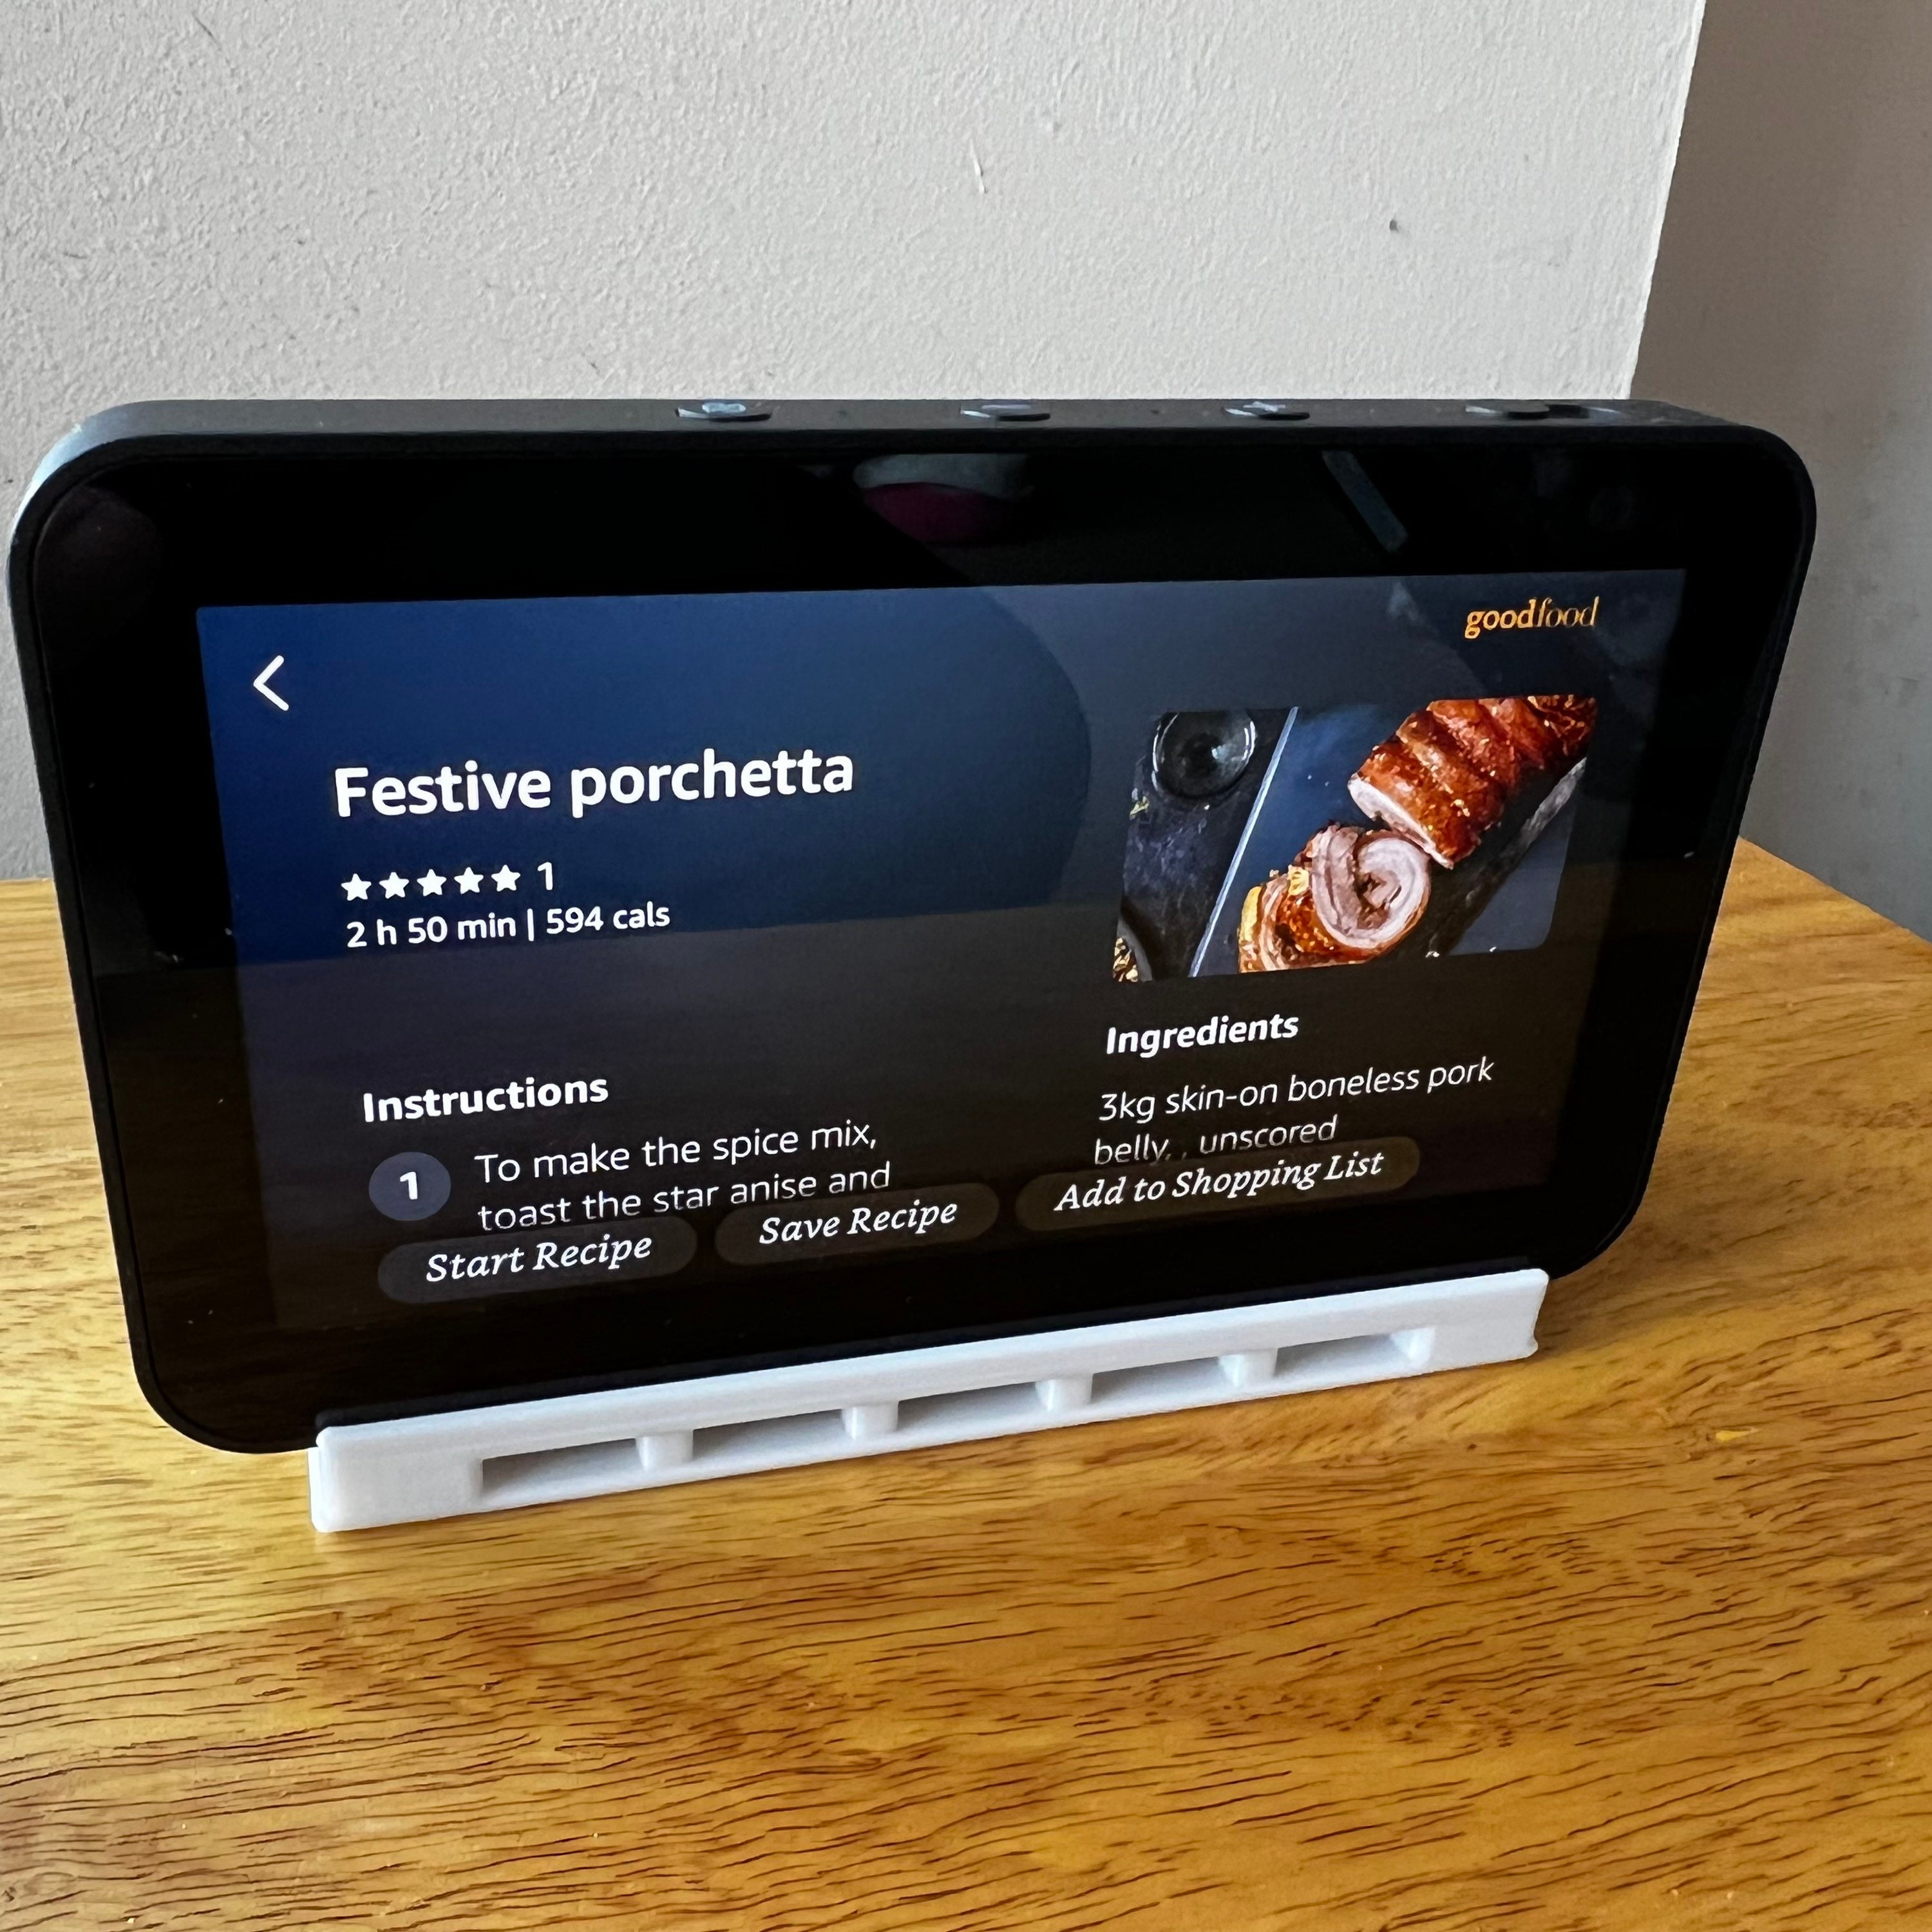 Wall Mount Bracket for Echo Show 8 Under Cabinet Holder Stand